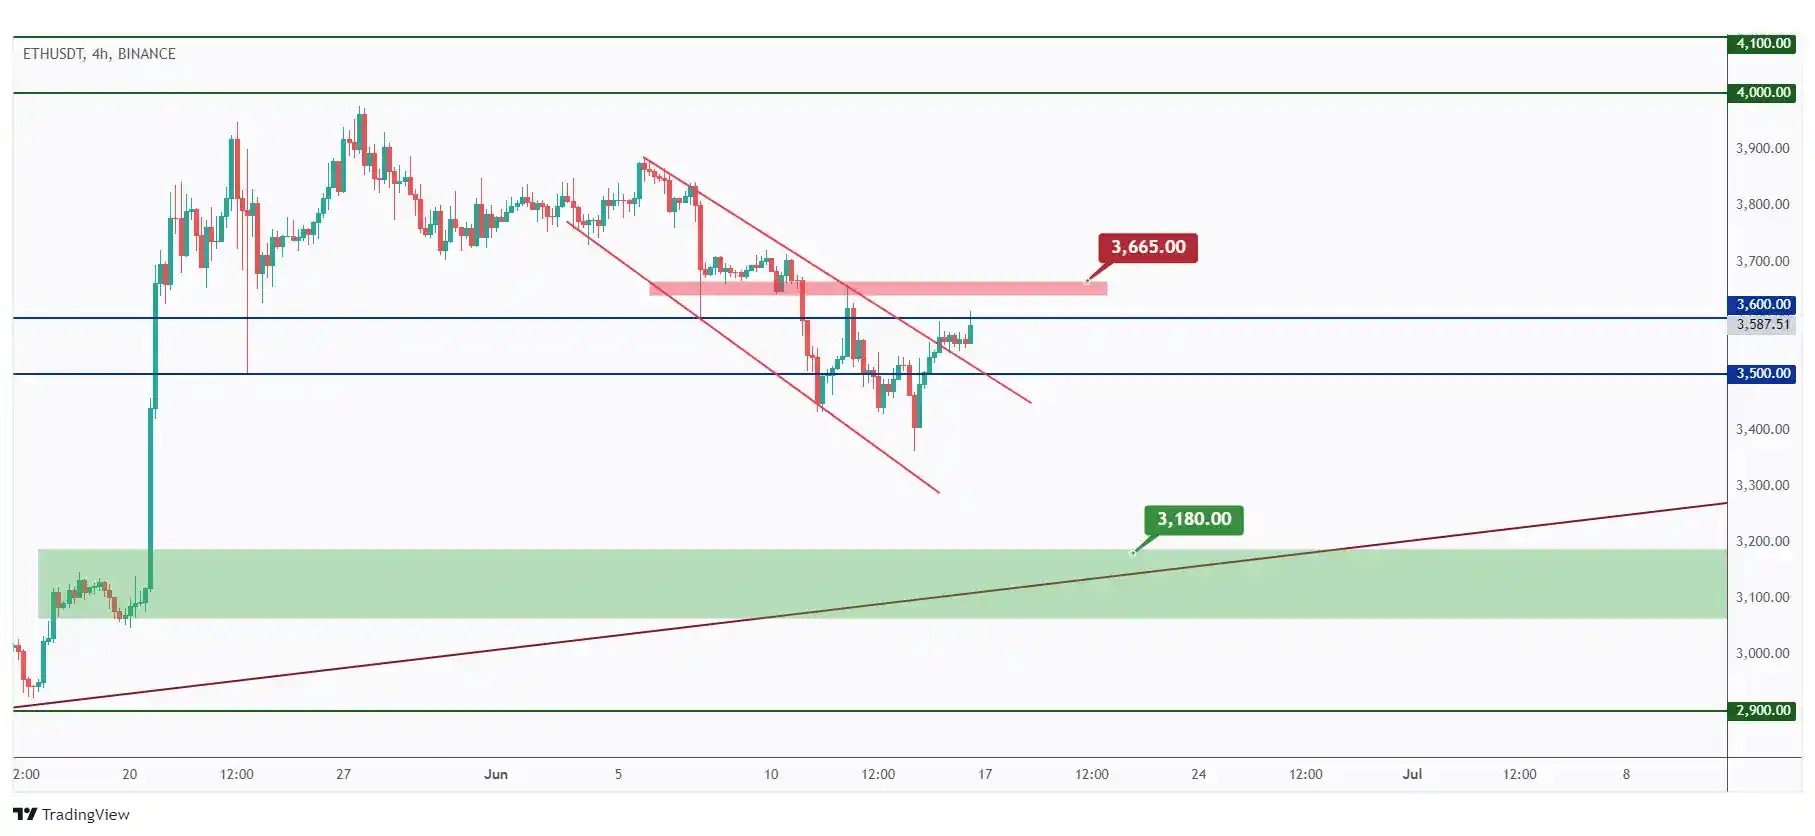 ETH 4h chart overall bearish trading within the falling channel unless the last high at $3,665 is broken upward.